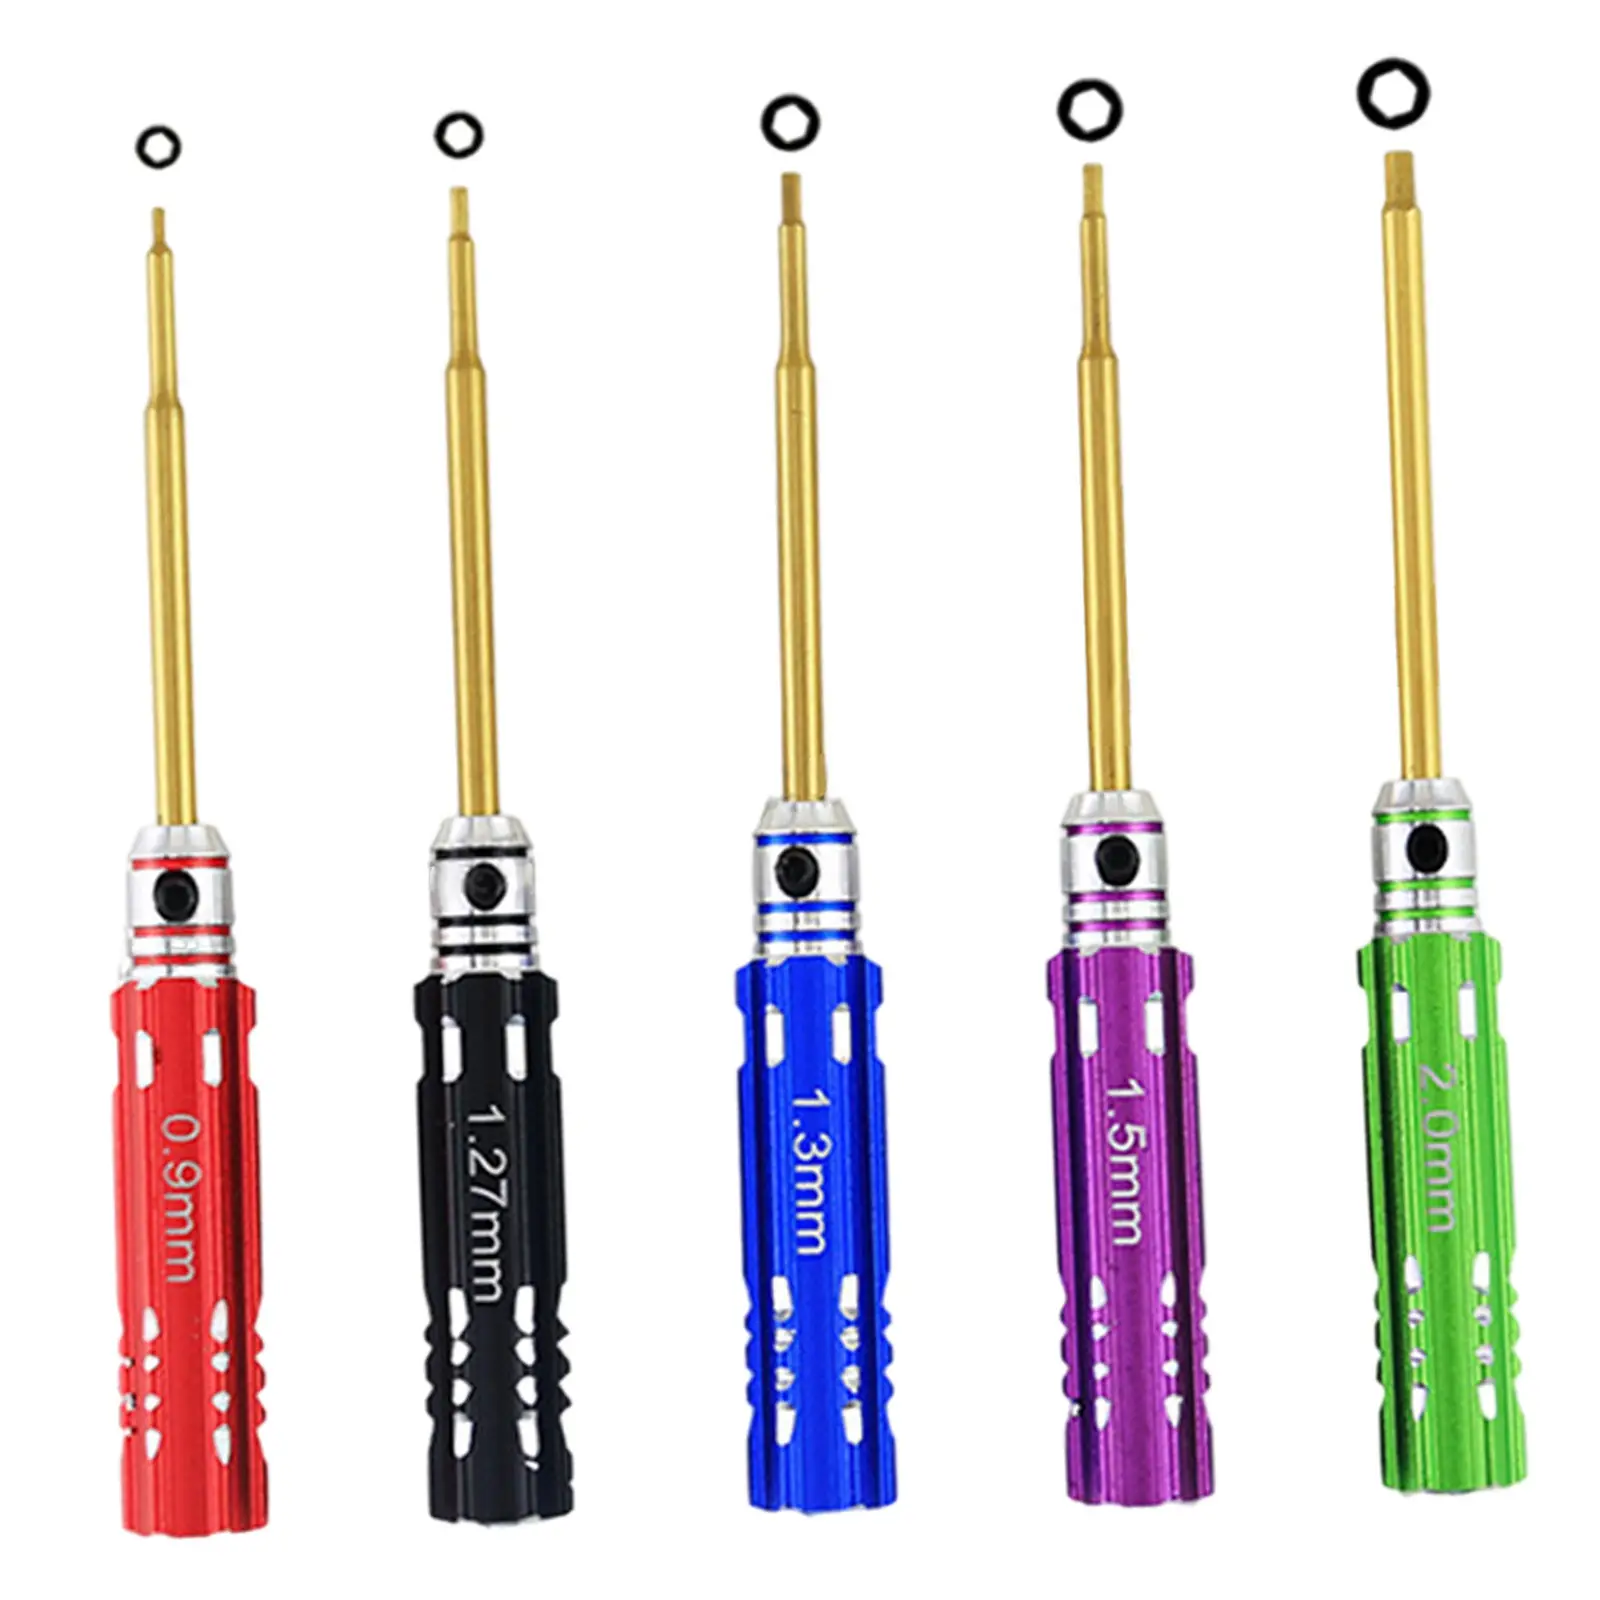 Precision RC Hex Screw Driver Tool 0.9/1.27/1.3/1.5/2.0mm for RC Model